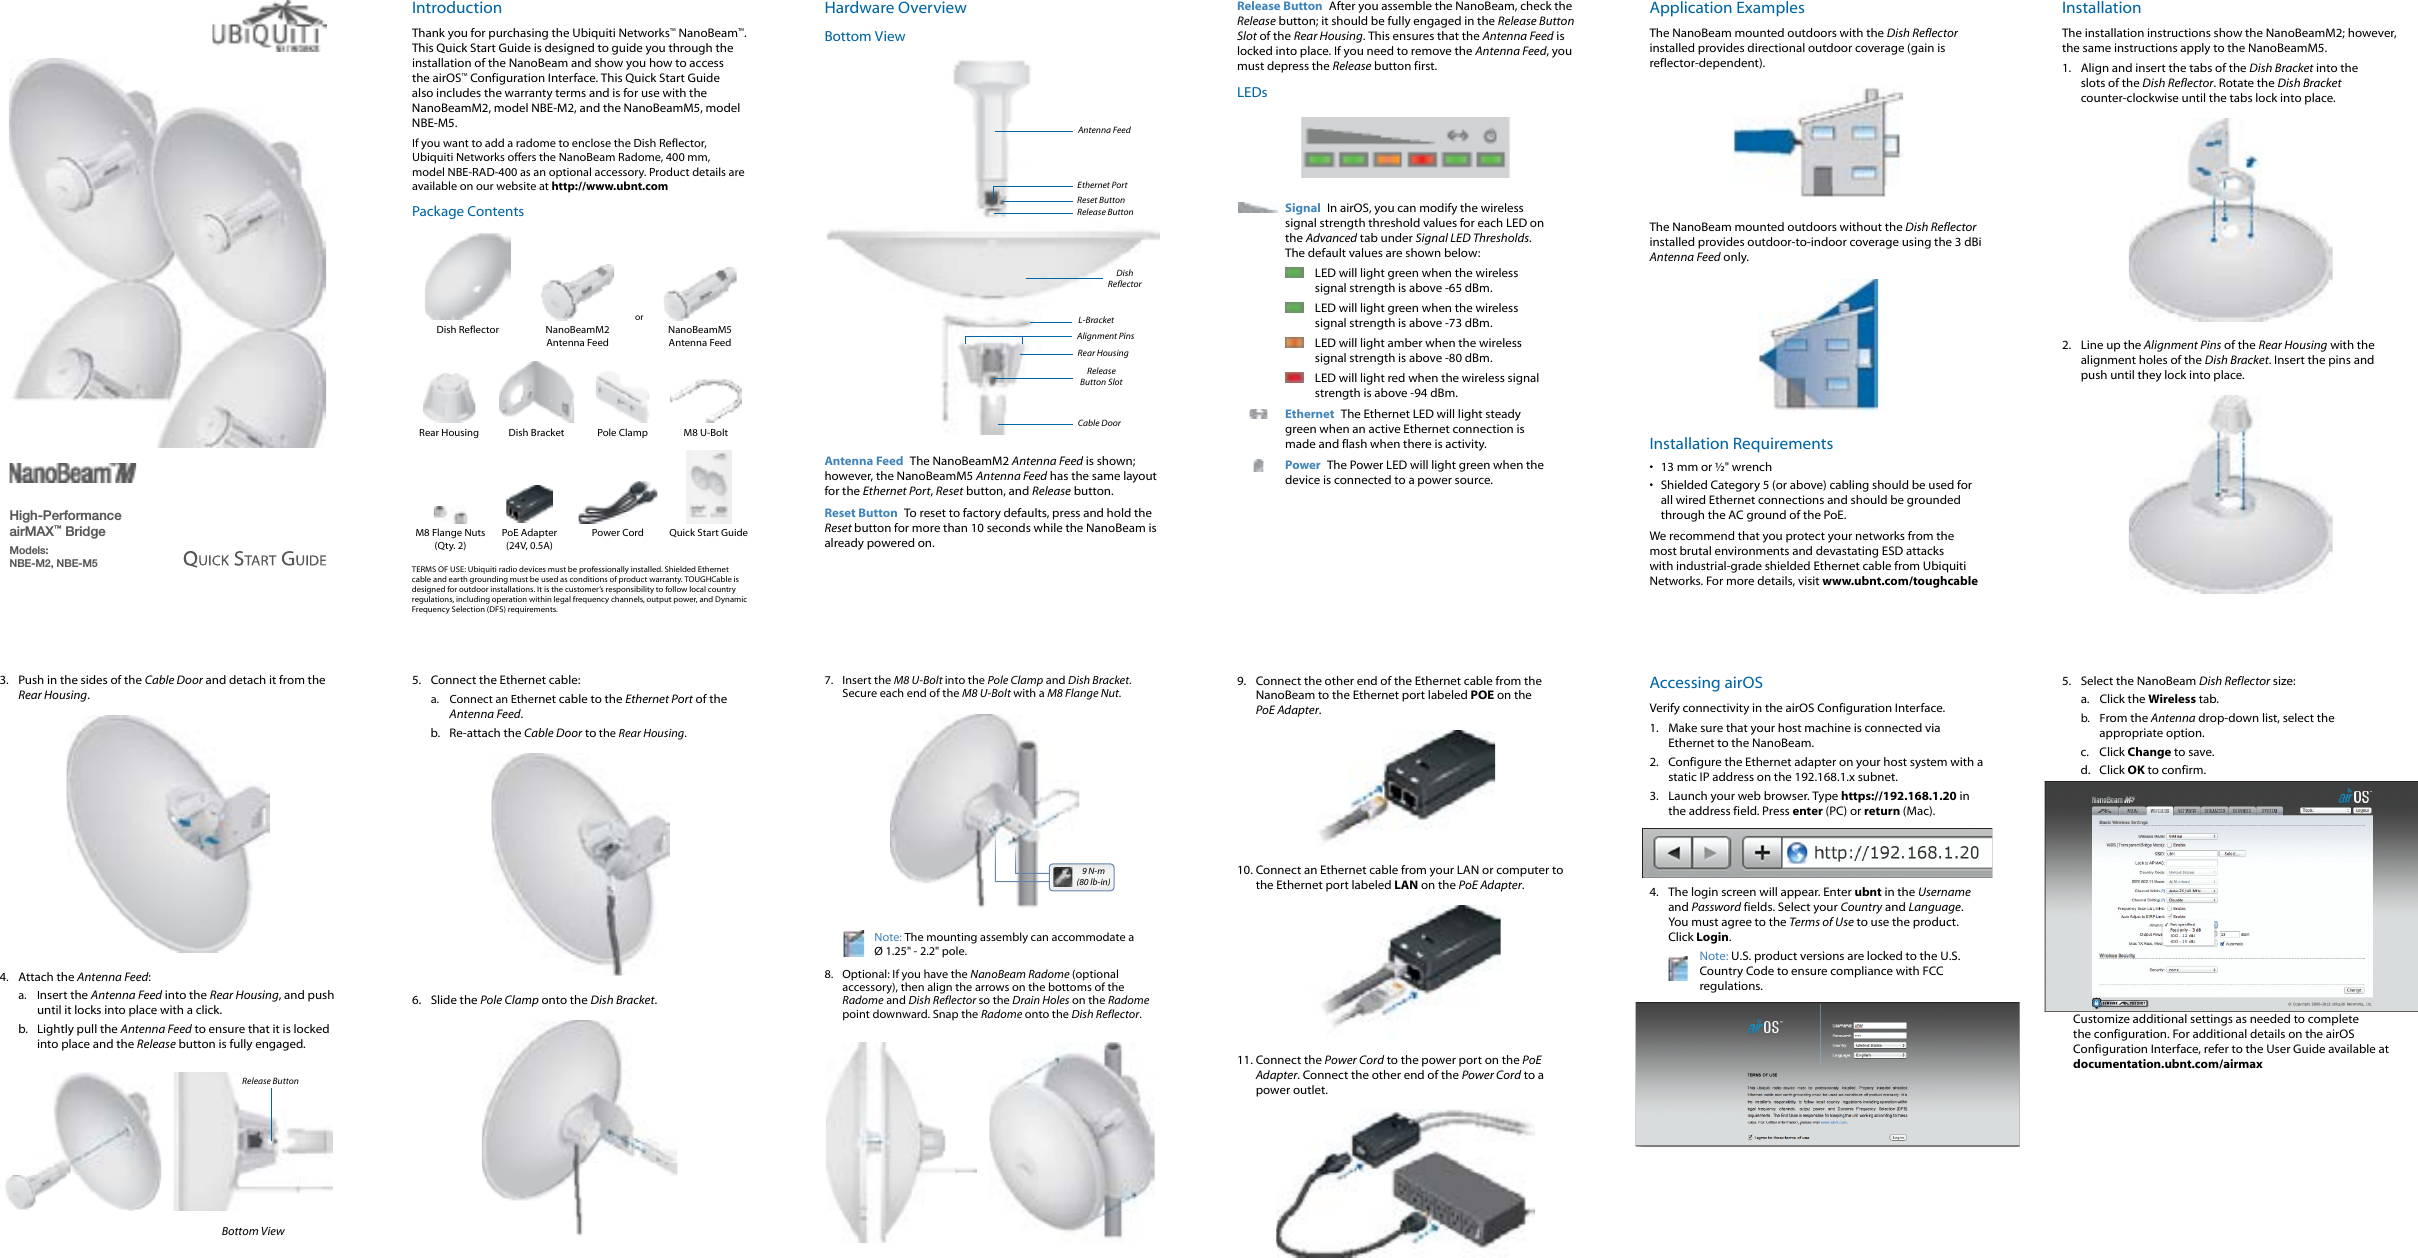 High-Performance airMAX™ BridgeModels:  NBE-M2, NBE-M5IntroductionThank you for purchasing the Ubiquiti Networks™ NanoBeam™. This Quick Start Guide is designed to guide you through the installation of the NanoBeam and show you how to access the airOS™ Configuration Interface. This Quick Start Guide also includes the warranty terms and is for use with the NanoBeamM2, model NBE-M2, and the NanoBeamM5, model NBE-M5.If you want to add a radome to enclose the Dish Reflector, UbiquitiNetworks offers the NanoBeam Radome, 400 mm, modelNBE-RAD-400 as an optional accessory. Product details are available on our website at http://www.ubnt.comPackage ContentsorDish Reflector NanoBeamM2  Antenna FeedNanoBeamM5  Antenna FeedRear Housing Dish Bracket Pole Clamp M8 U-BoltM8 Flange Nuts (Qty. 2)PoE Adapter (24V, 0.5A)Power Cord Quick Start GuideTERMS OF USE: Ubiquiti radio devices must be professionally installed. Shielded Ethernet cable and earth grounding must be used as conditions of product warranty. TOUGHCable is designed for outdoor installations. It is the customer’s responsibility to follow local country regulations, including operation within legal frequency channels, output power, and Dynamic Frequency Selection (DFS) requirements.Hardware OverviewBottom ViewCable DoorRear HousingAntenna FeedEthernet PortRelease Button SlotL-BracketRelease ButtonDish ReflectorAlignment PinsReset ButtonAntenna Feed  The NanoBeamM2 Antenna Feed is shown; however, the NanoBeamM5 Antenna Feed has the same layout for the Ethernet Port, Reset button, and Release button.Reset Button  To reset to factory defaults, press and hold the Reset button for more than 10 seconds while the NanoBeam is already poweredon.Release Button  After you assemble the NanoBeam, check the Release button; it should be fully engaged in the Release Button Slot of the Rear Housing. This ensures that the Antenna Feed is locked into place. If you need to remove the Antenna Feed, you must depress the Release button first.LEDsSignal  In airOS, you can modify the wireless signal strength threshold values for each LED on the Advanced tab under Signal LED Thresholds. The default values are shown below:LED will light green when the wireless signal strength is above -65 dBm.LED will light green when the wireless signal strength is above -73 dBm.LED will light amber when the wireless signal strength is above -80 dBm.LED will light red when the wireless signal strength is above -94 dBm.Ethernet  The Ethernet LED will light steady green when an active Ethernet connection is made and flash when there is activity.Power  The Power LED will light green when the device is connected to a power source.Application ExamplesThe NanoBeam mounted outdoors with the Dish Reflector installed provides directional outdoor coverage (gain is reflector-dependent).The NanoBeam mounted outdoors without the Dish Reflector installed provides outdoor-to-indoor coverage using the 3 dBi Antenna Feed only.Installation Requirements•  13 mm or ½&quot; wrench•  Shielded Category 5 (or above) cabling should be used for all wired Ethernet connections and should be grounded through the AC ground of the PoE.We recommend that you protect your networks from the most brutal environments and devastating ESD attacks with industrial-grade shielded Ethernet cable from Ubiquiti Networks. For more details, visit www.ubnt.com/toughcableInstallationThe installation instructions show the NanoBeamM2; however, the same instructions apply to the NanoBeamM5. 1.  Align and insert the tabs of the Dish Bracket into the slots of the Dish Reflector. Rotate the Dish Bracket counter-clockwise until the tabs lock into place.2.  Line up the Alignment Pins of the Rear Housing with the alignment holes of the Dish Bracket. Insert the pins and push until they lock intoplace.3.  Push in the sides of the Cable Door and detach it from the Rear Housing.4.  Attach the Antenna Feed:a.  Insert the Antenna Feed into the Rear Housing, and push until it locks into place with a click. b.  Lightly pull the Antenna Feed to ensure that it is locked into place and the Release button is fully engaged.Release ButtonBottom View5.  Connect the Ethernet cable:a.  Connect an Ethernet cable to the Ethernet Port of the Antenna Feed. b.  Re-attach the Cable Door to the Rear Housing.6.  Slide the Pole Clamp onto the Dish Bracket.7.  Insert the M8 U-Bolt into the Pole Clamp and Dish Bracket. Secure each end of the M8 U-Bolt with a M8Flange Nut.9 N-m (80 lb-in)Note: The mounting assembly can accommodate a  Ø 1.25&quot; - 2.2&quot; pole.8.  Optional: If you have the NanoBeam Radome (optional accessory), then align the arrows on the bottoms of the Radome and Dish Reflector so the Drain Holes on the Radome point downward. Snap the Radome onto the Dish Reflector.9.  Connect the other end of the Ethernet cable from the NanoBeam to the Ethernet port labeled POE on the PoEAdapter.10. Connect an Ethernet cable from your LAN or computer to the Ethernet port labeled LAN on the PoE Adapter.11. Connect the Power Cord to the power port on the PoE Adapter. Connect the other end of the Power Cord to a power outlet.Accessing airOSVerify connectivity in the airOS Configuration Interface. 1.  Make sure that your host machine is connected via Ethernet to the NanoBeam. 2.  Configure the Ethernet adapter on your host system with a static IP address on the 192.168.1.x subnet.3.  Launch your web browser. Type https://192.168.1.20 in the address field. Press enter (PC) or return (Mac). 4.  The login screen will appear. Enter ubnt in the Username and Password fields. Select your Country and Language. You must agree to the Terms of Use to use the product. Click Login.Note: U.S. product versions are locked to the U.S. Country Code to ensure compliance with FCC regulations. 5.  Select the NanoBeam Dish Reflector size:a.  Click the Wireless tab.b.  From the Antenna drop-down list, select the appropriate option.c.  Click Change to save.d.  Click OK to confirm.Customize additional settings as needed to complete the configuration. For additional details on the airOS Configuration Interface, refer to the User Guide available at documentation.ubnt.com/airmax